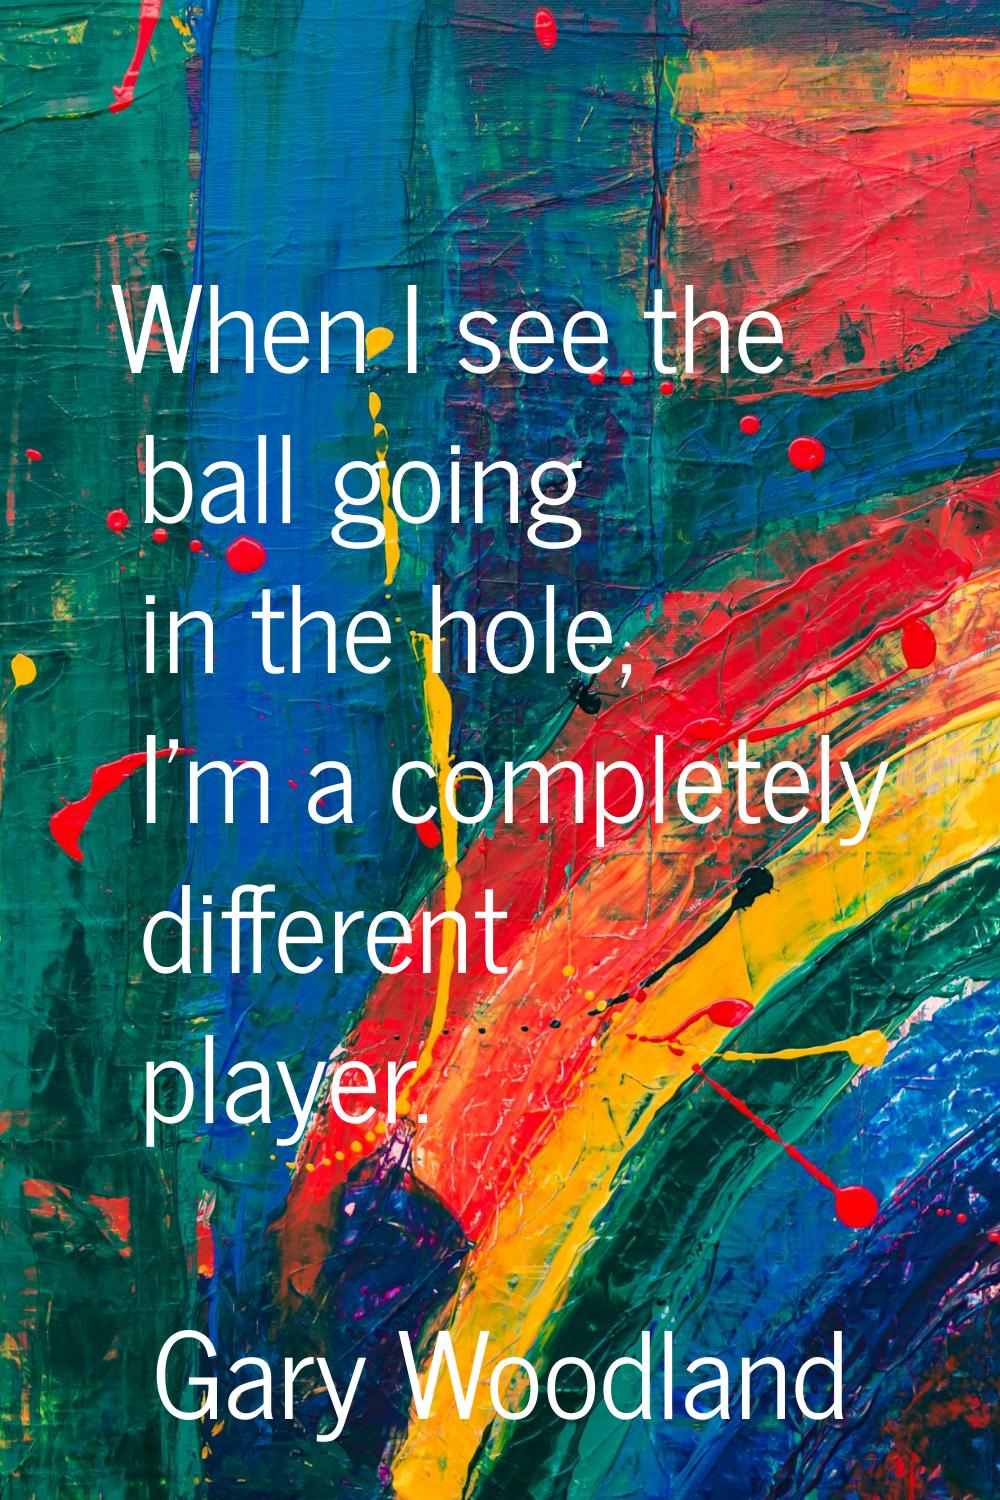 When I see the ball going in the hole, I'm a completely different player.